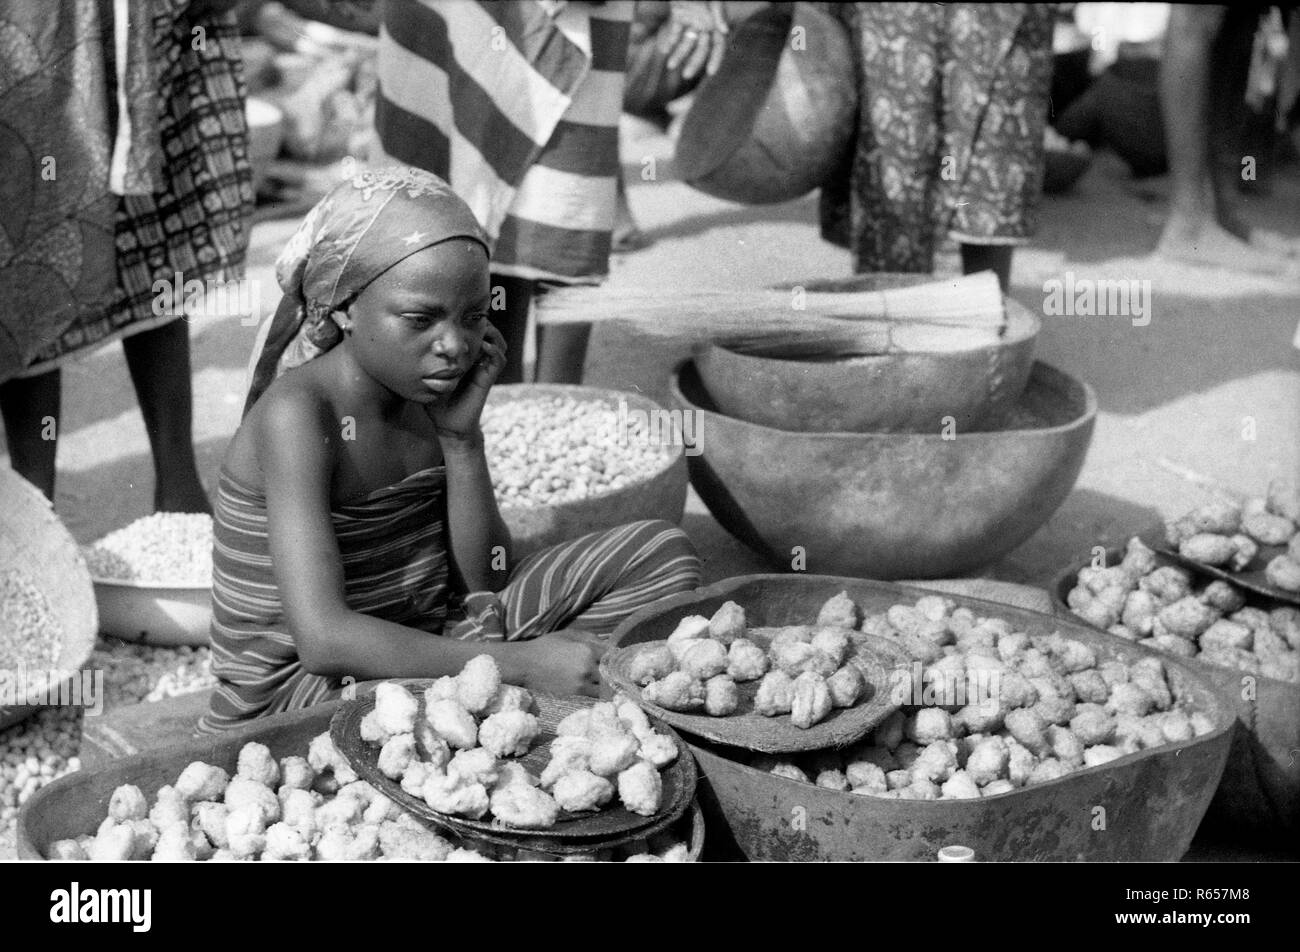 Native Tribes People young girl selling food at market Cameroon Africa 1959 Stock Photo